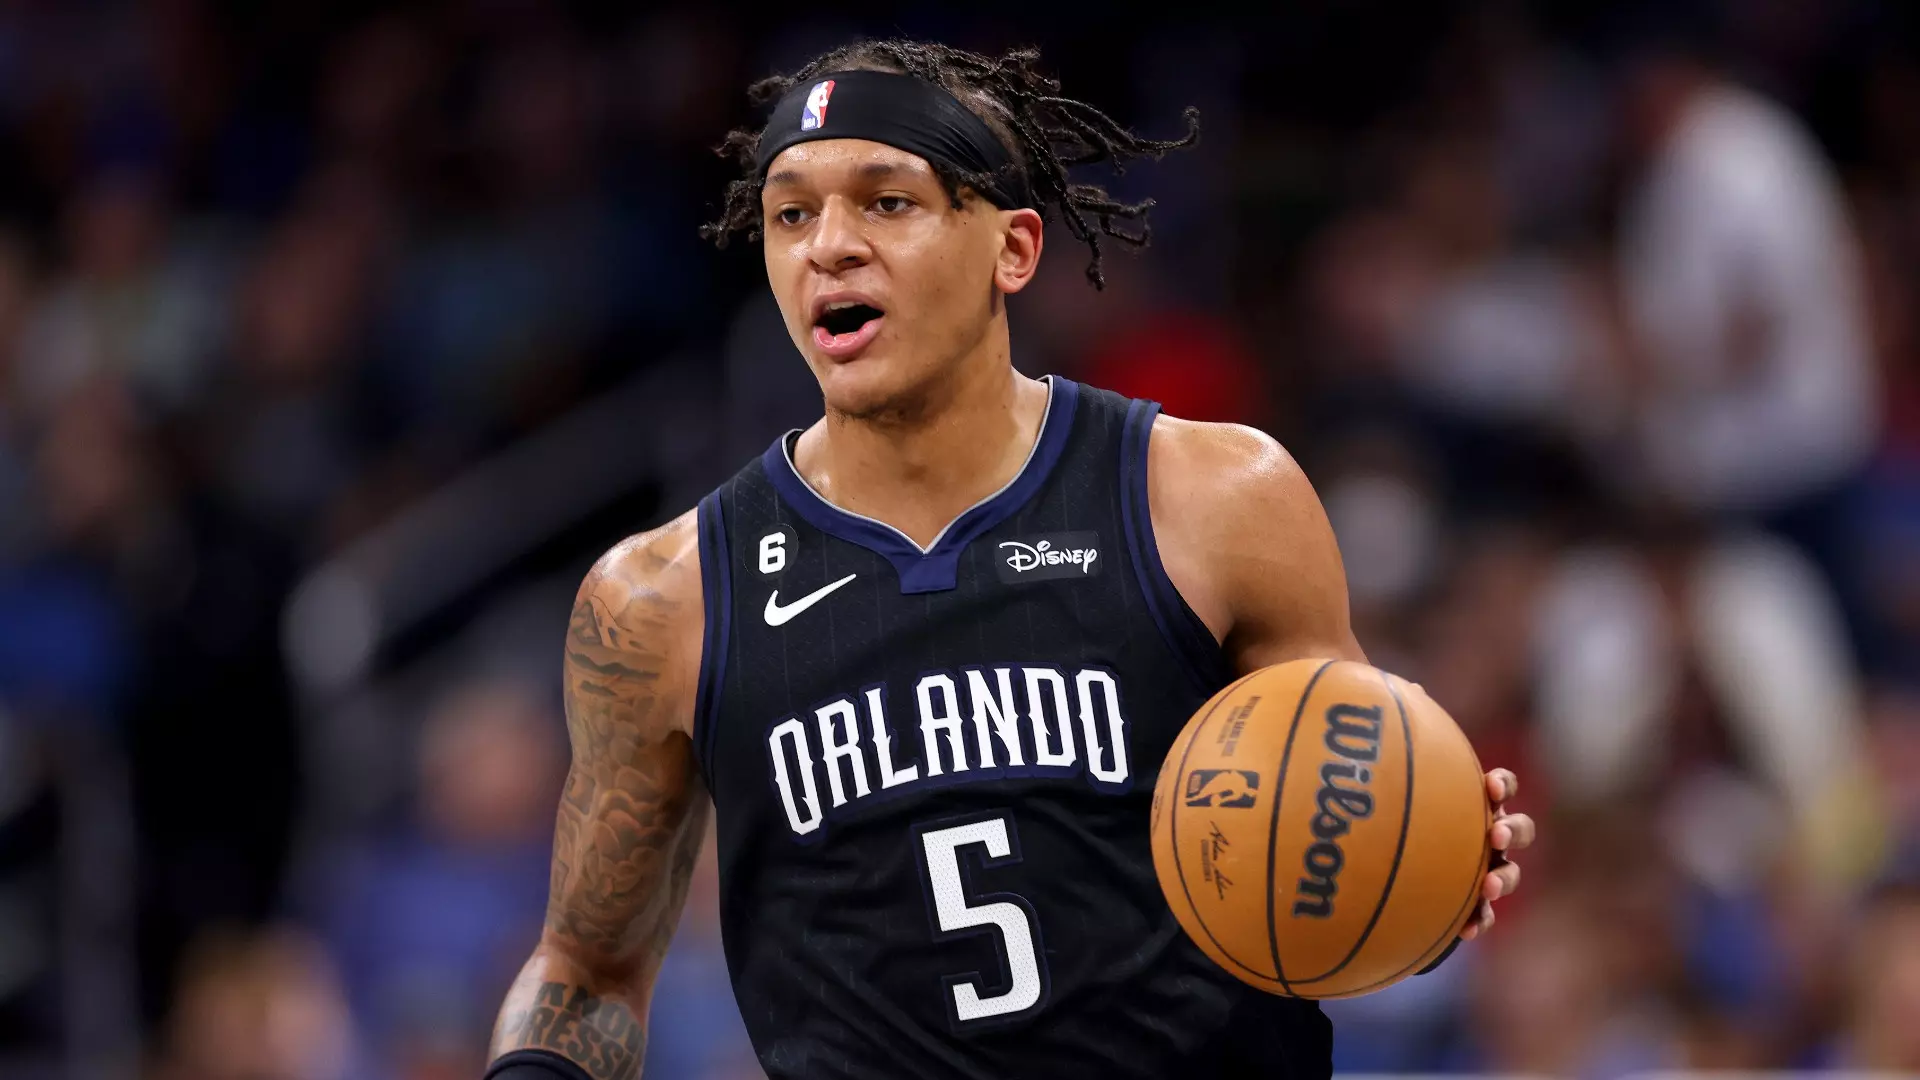 NBA, Paolo Banchero vince il titolo Rookie of the Year